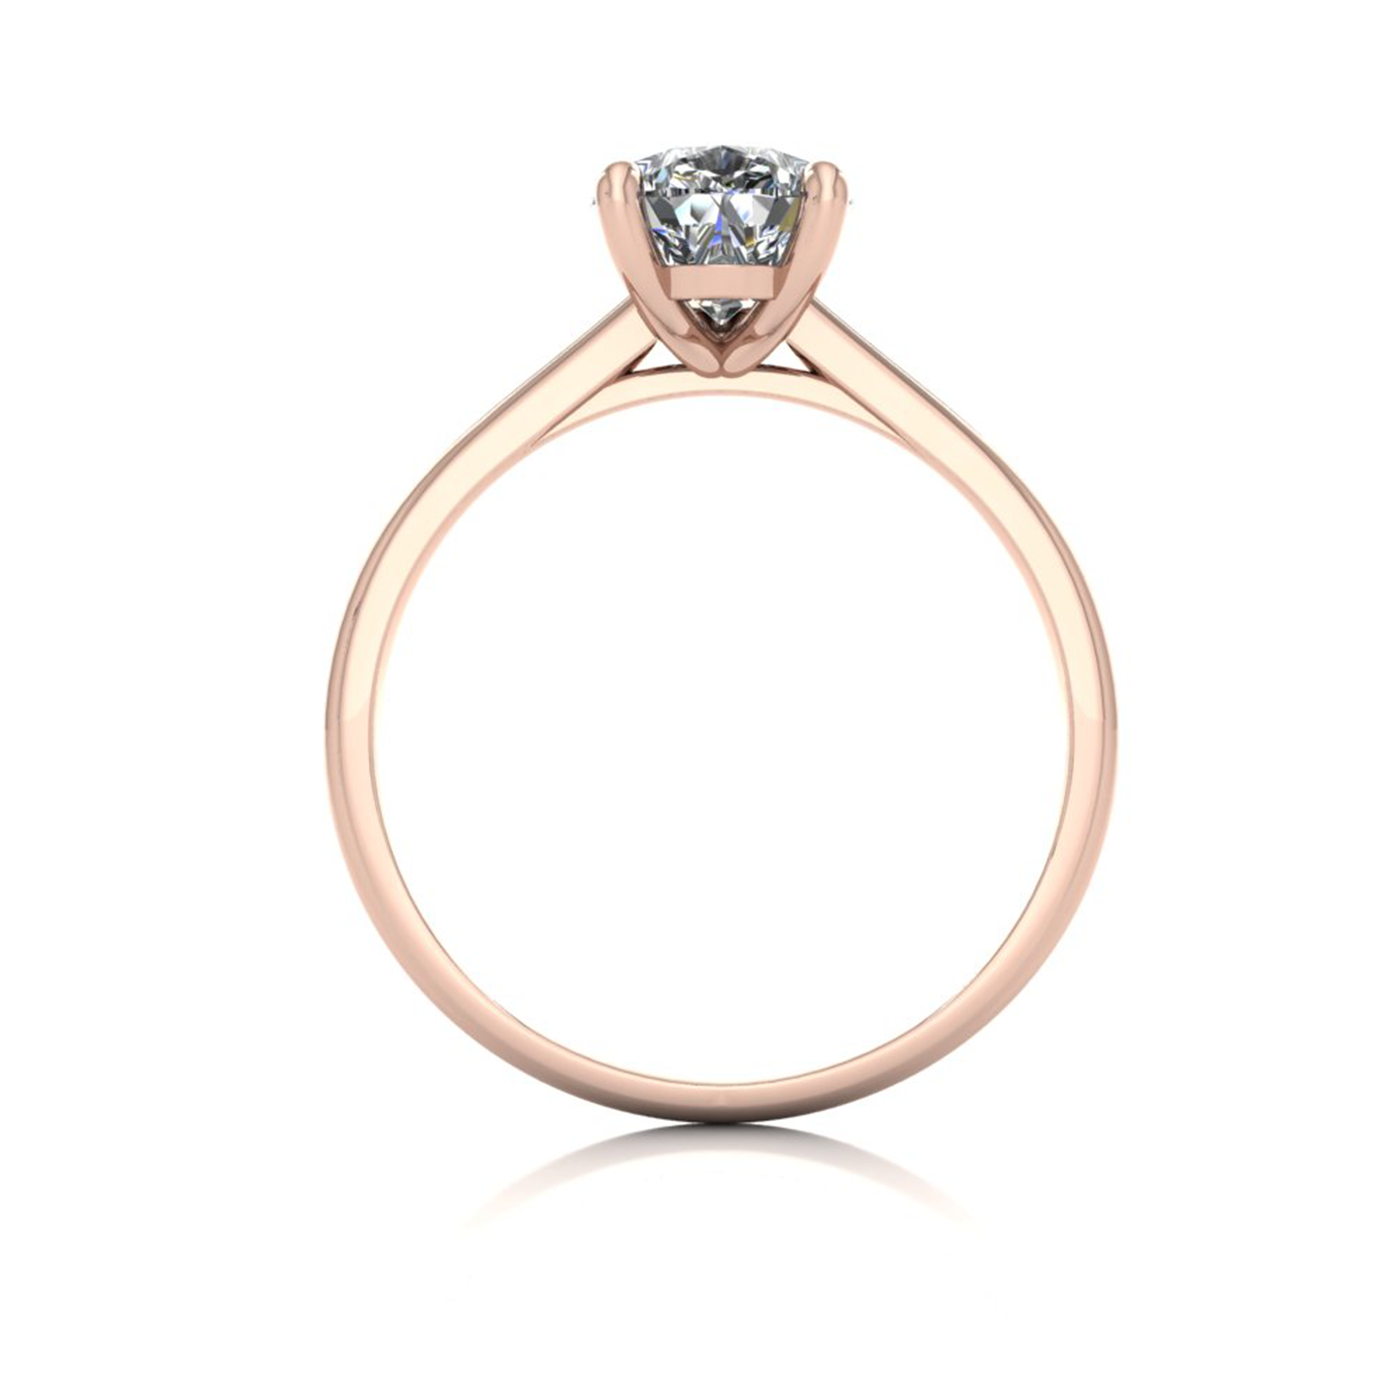 18k rose gold  1,50 ct 3 prongs solitaire pear cut diamond engagement ring with whisper thin band